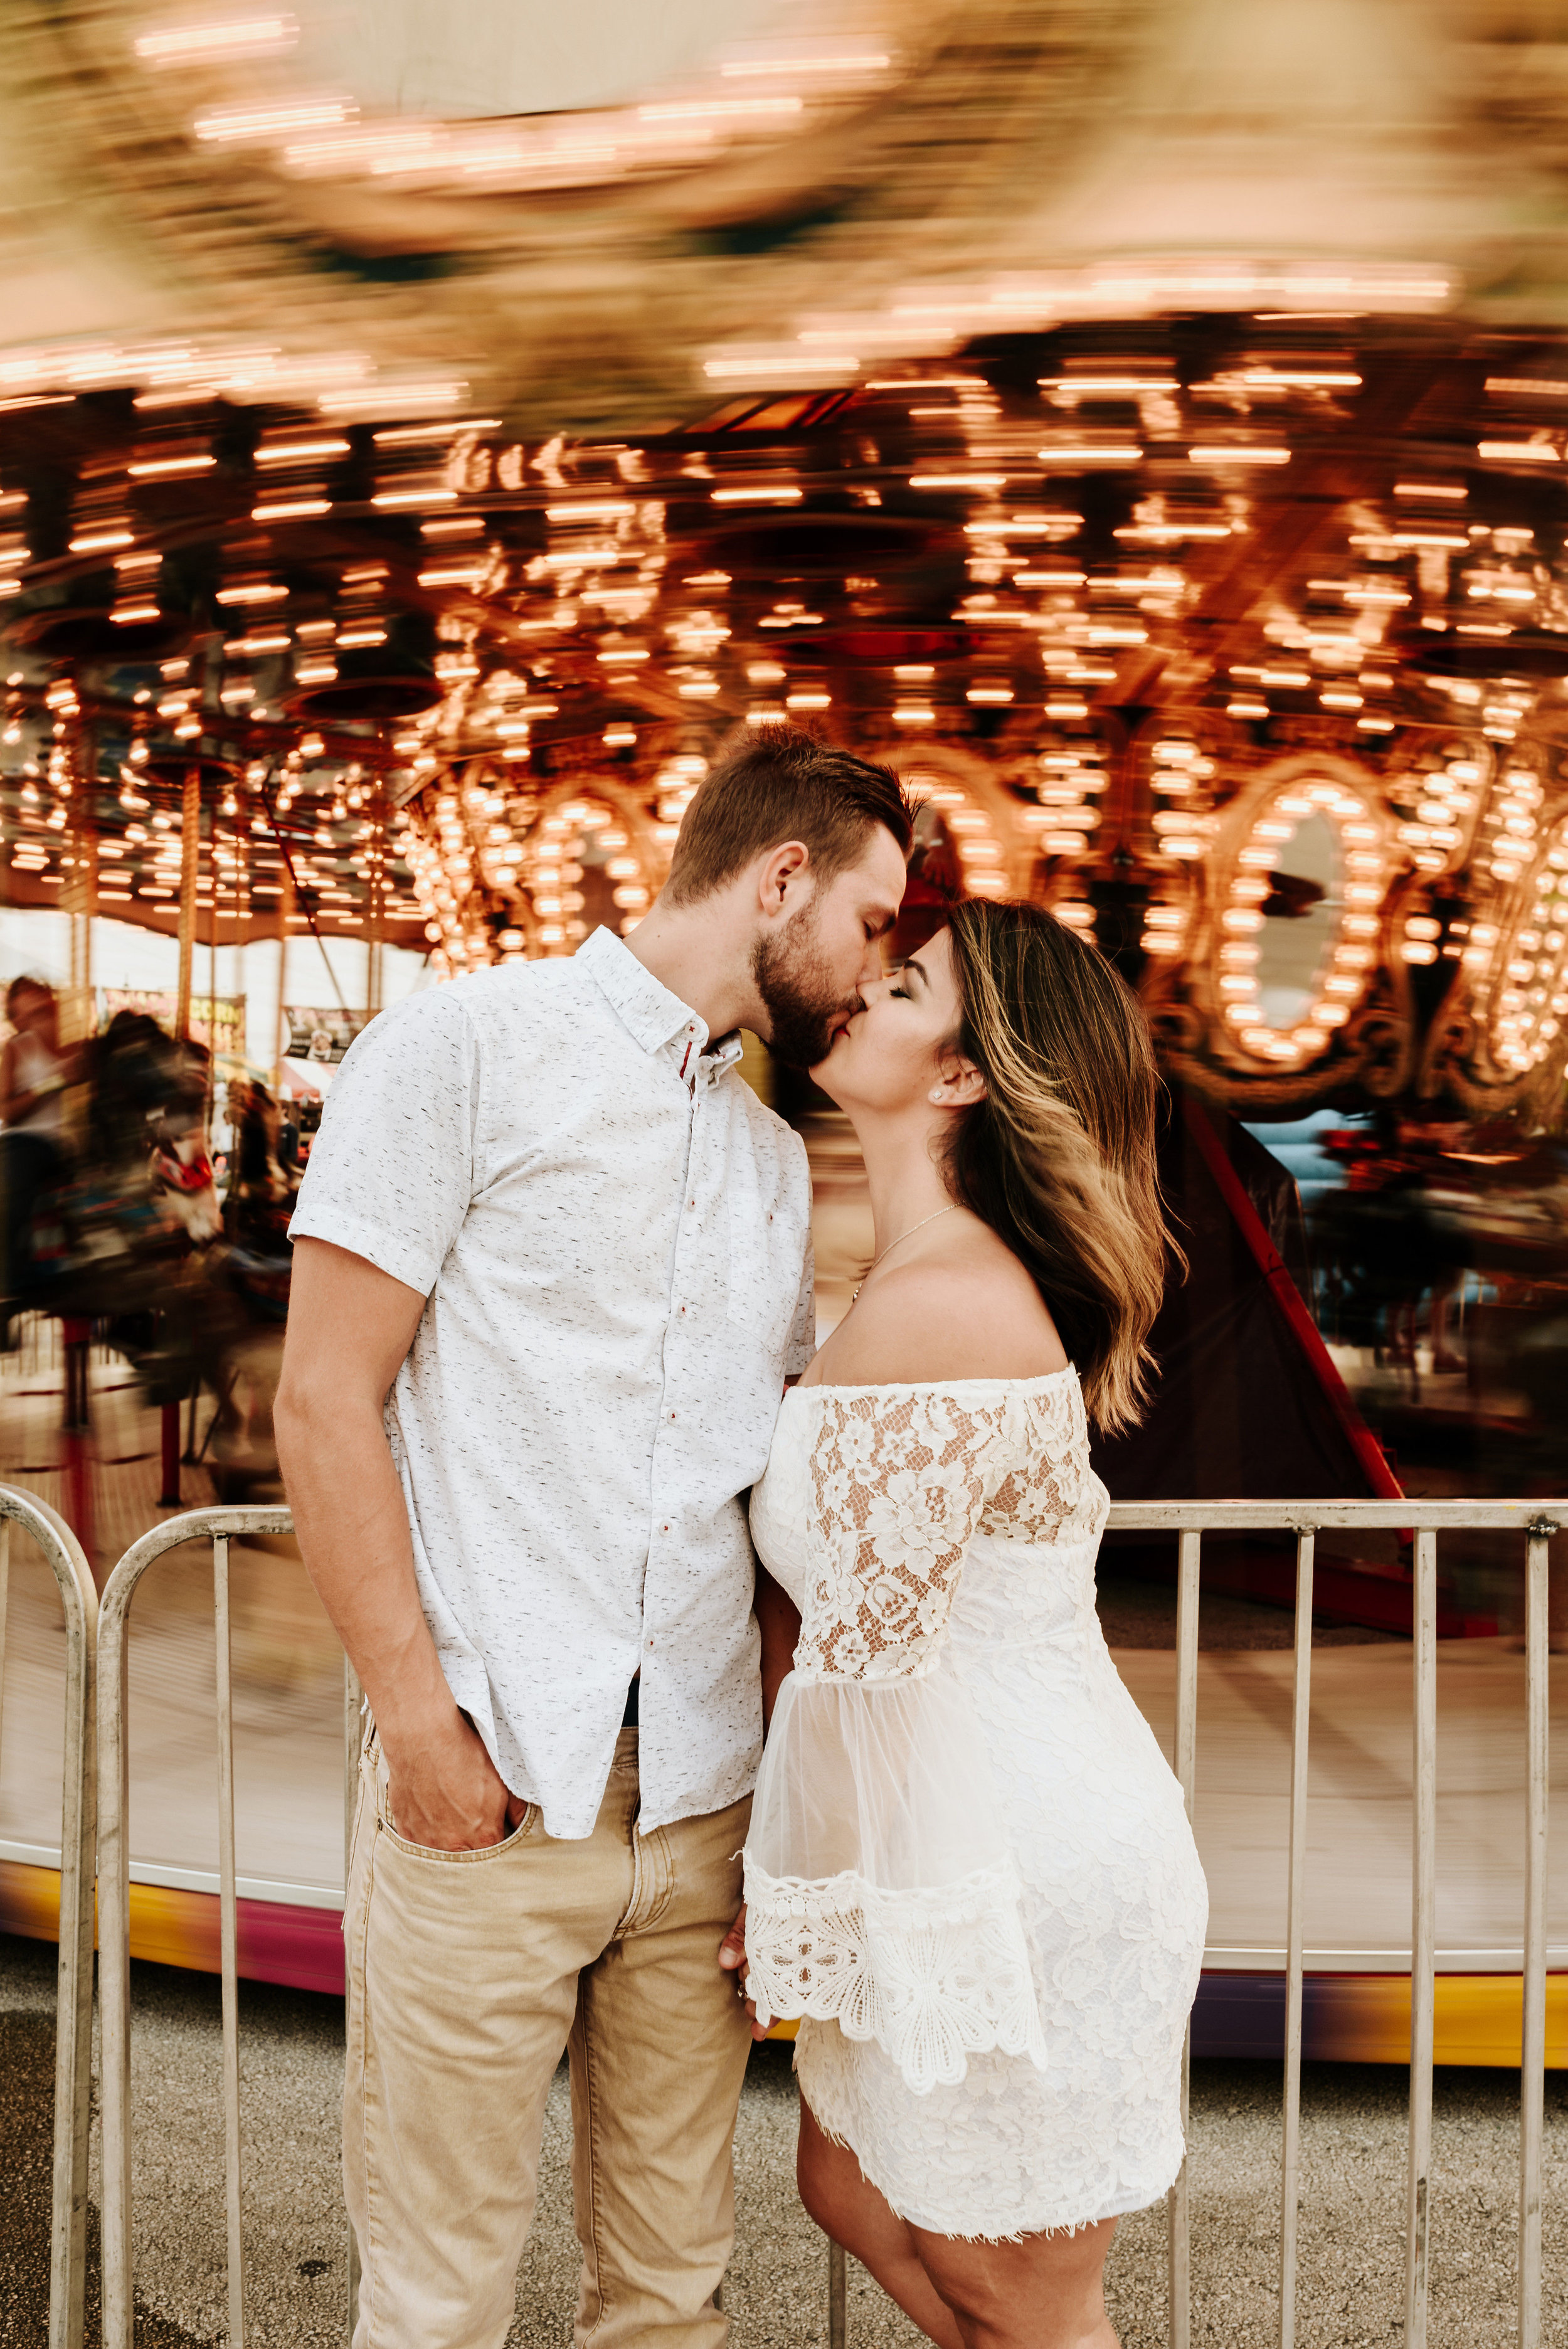 Ana_Justin_Engagement_Session_Miami_Dade_Fair_Photography_by_V_3505.jpg